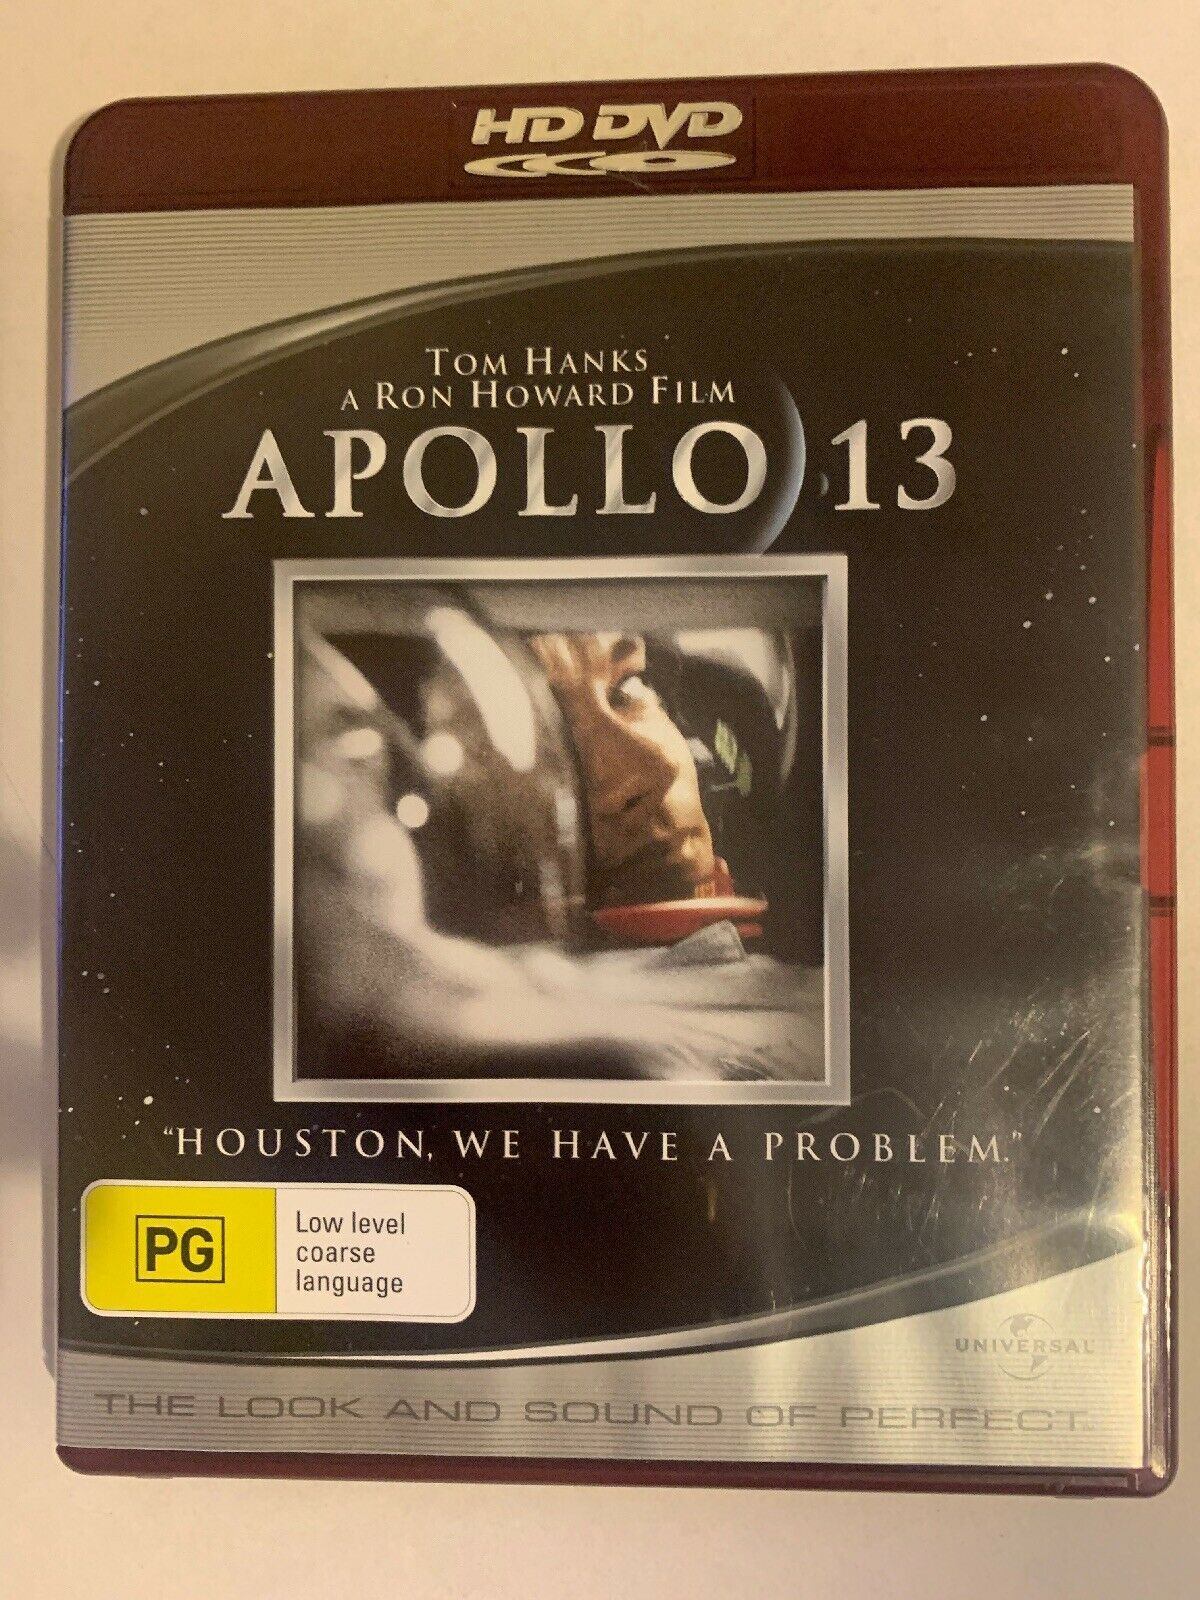 Apollo 13 (1995) HD DVD Will only work with HD DVD players